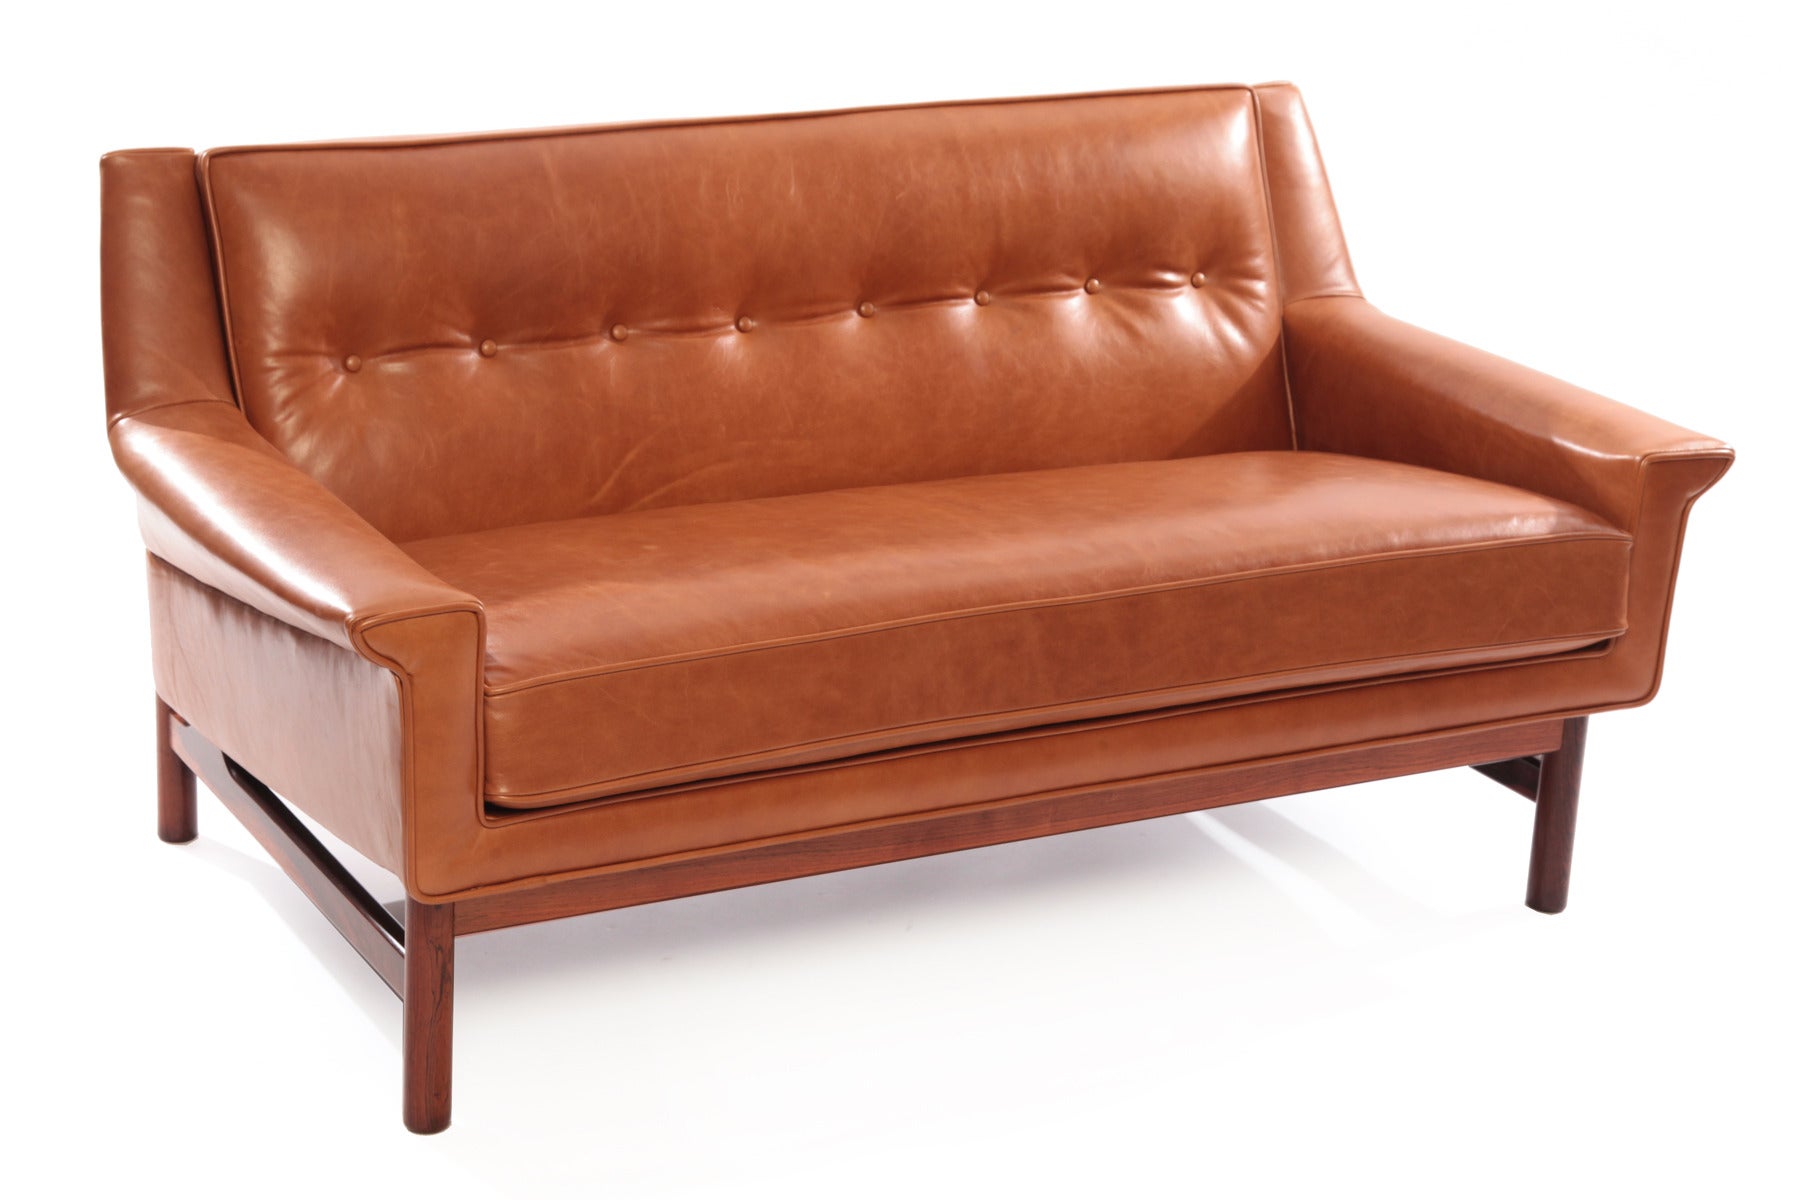 Gorgeous Caramel Leather and Rosewood Danish Loveseat